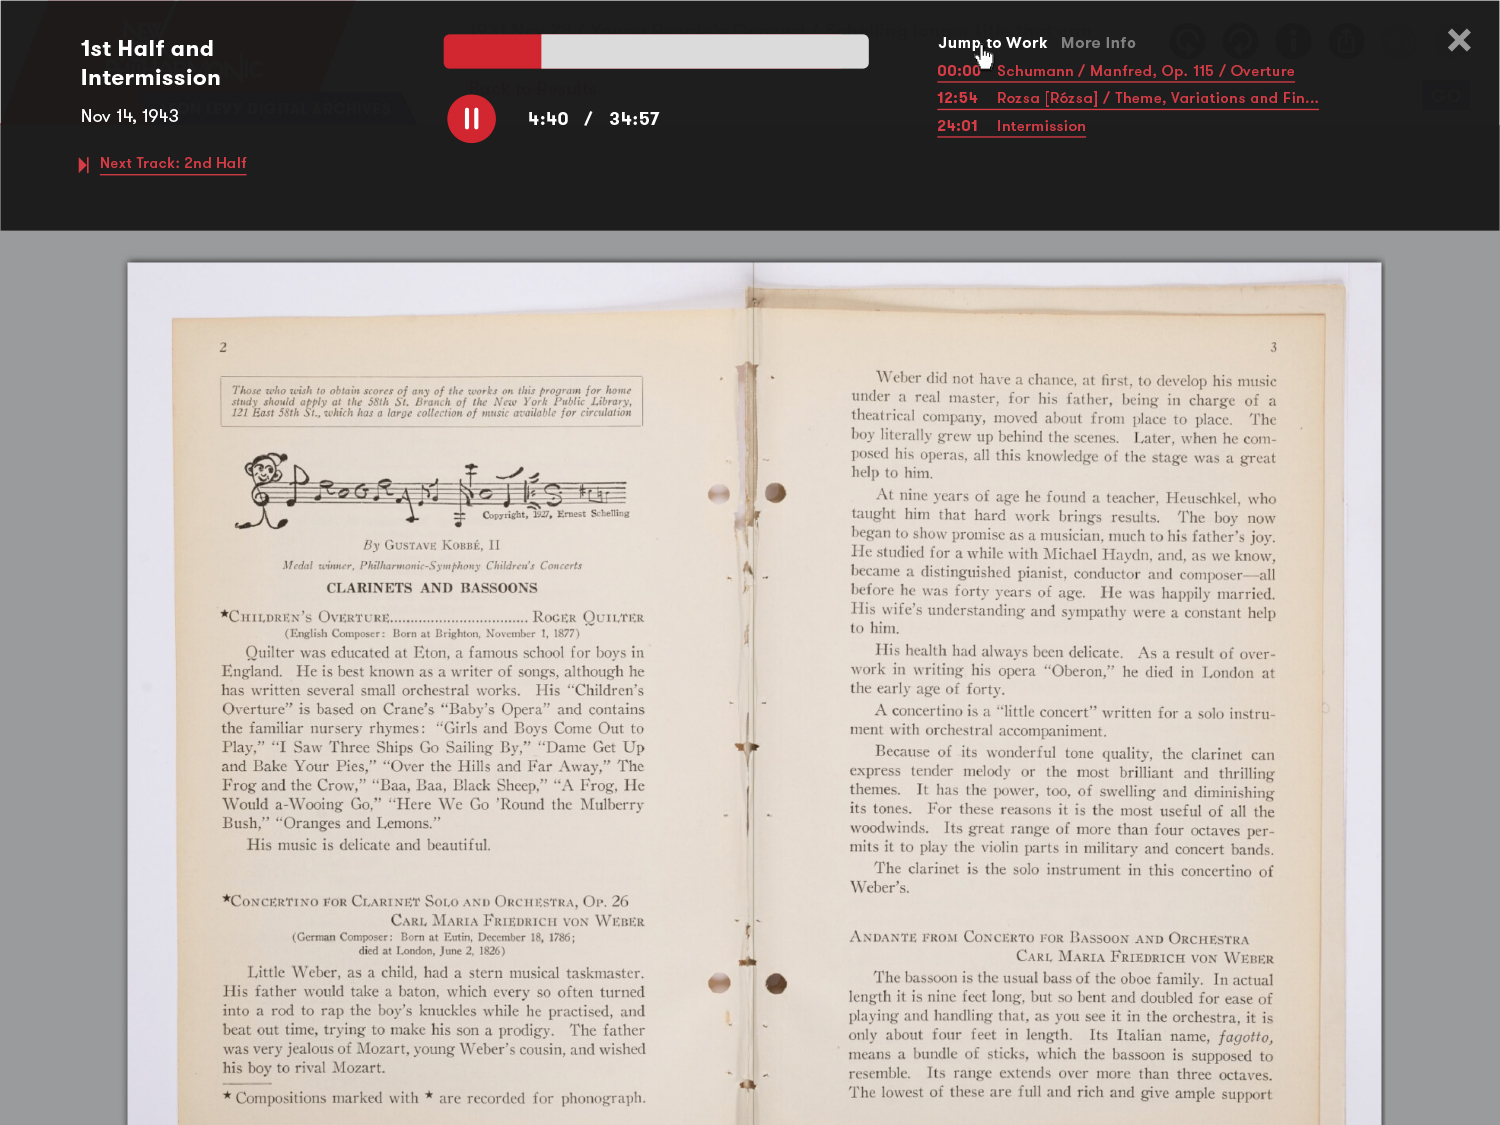 NYPhil Archives book reader with media player